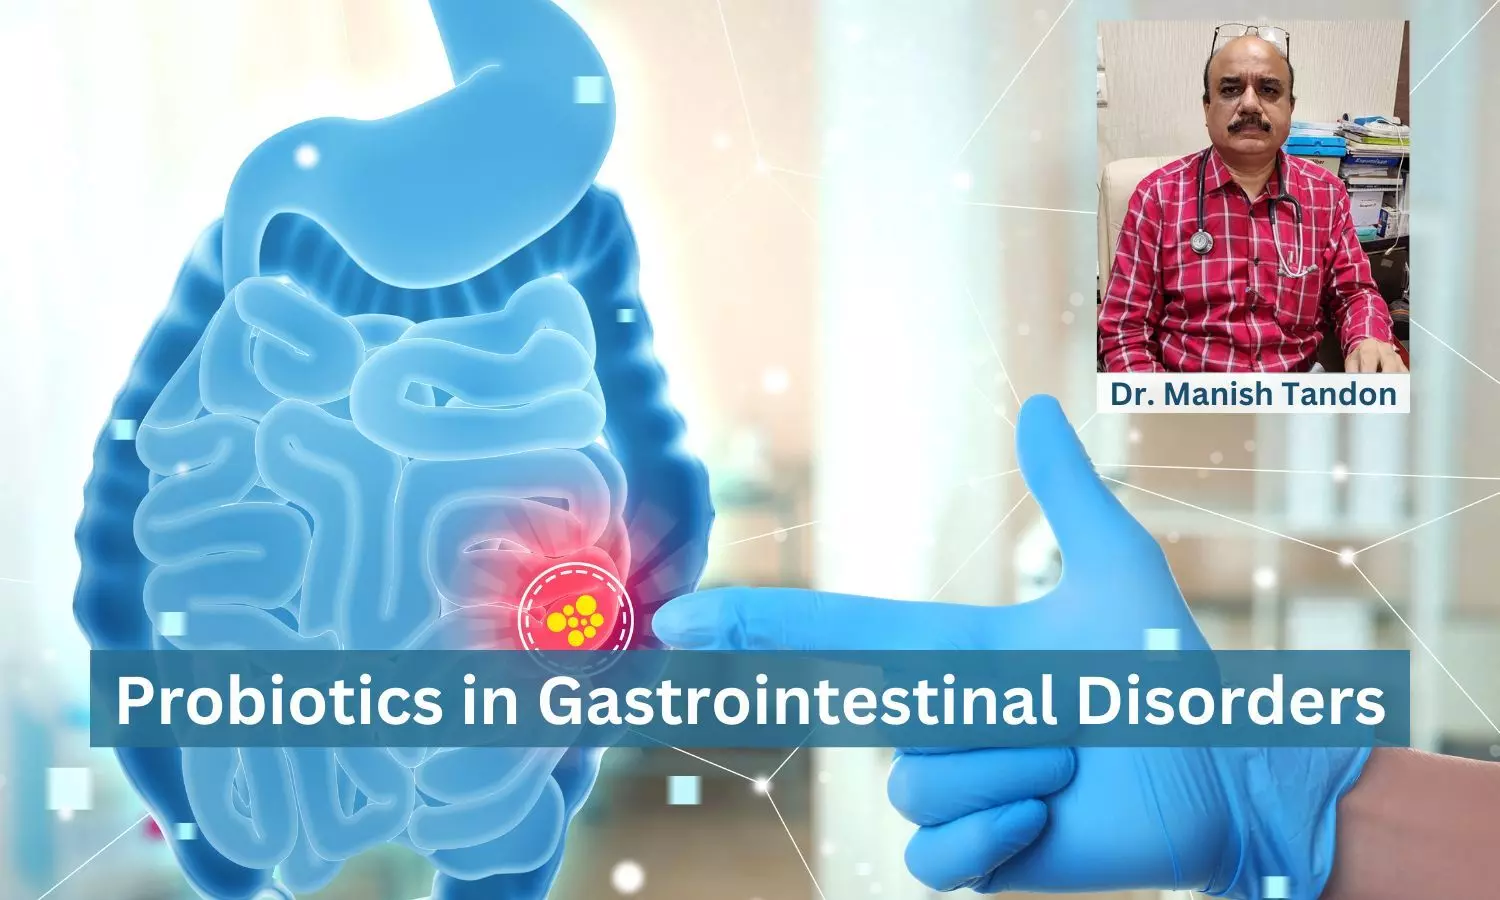 Consideration for Use of Probiotics in Gastrointestinal Disorders